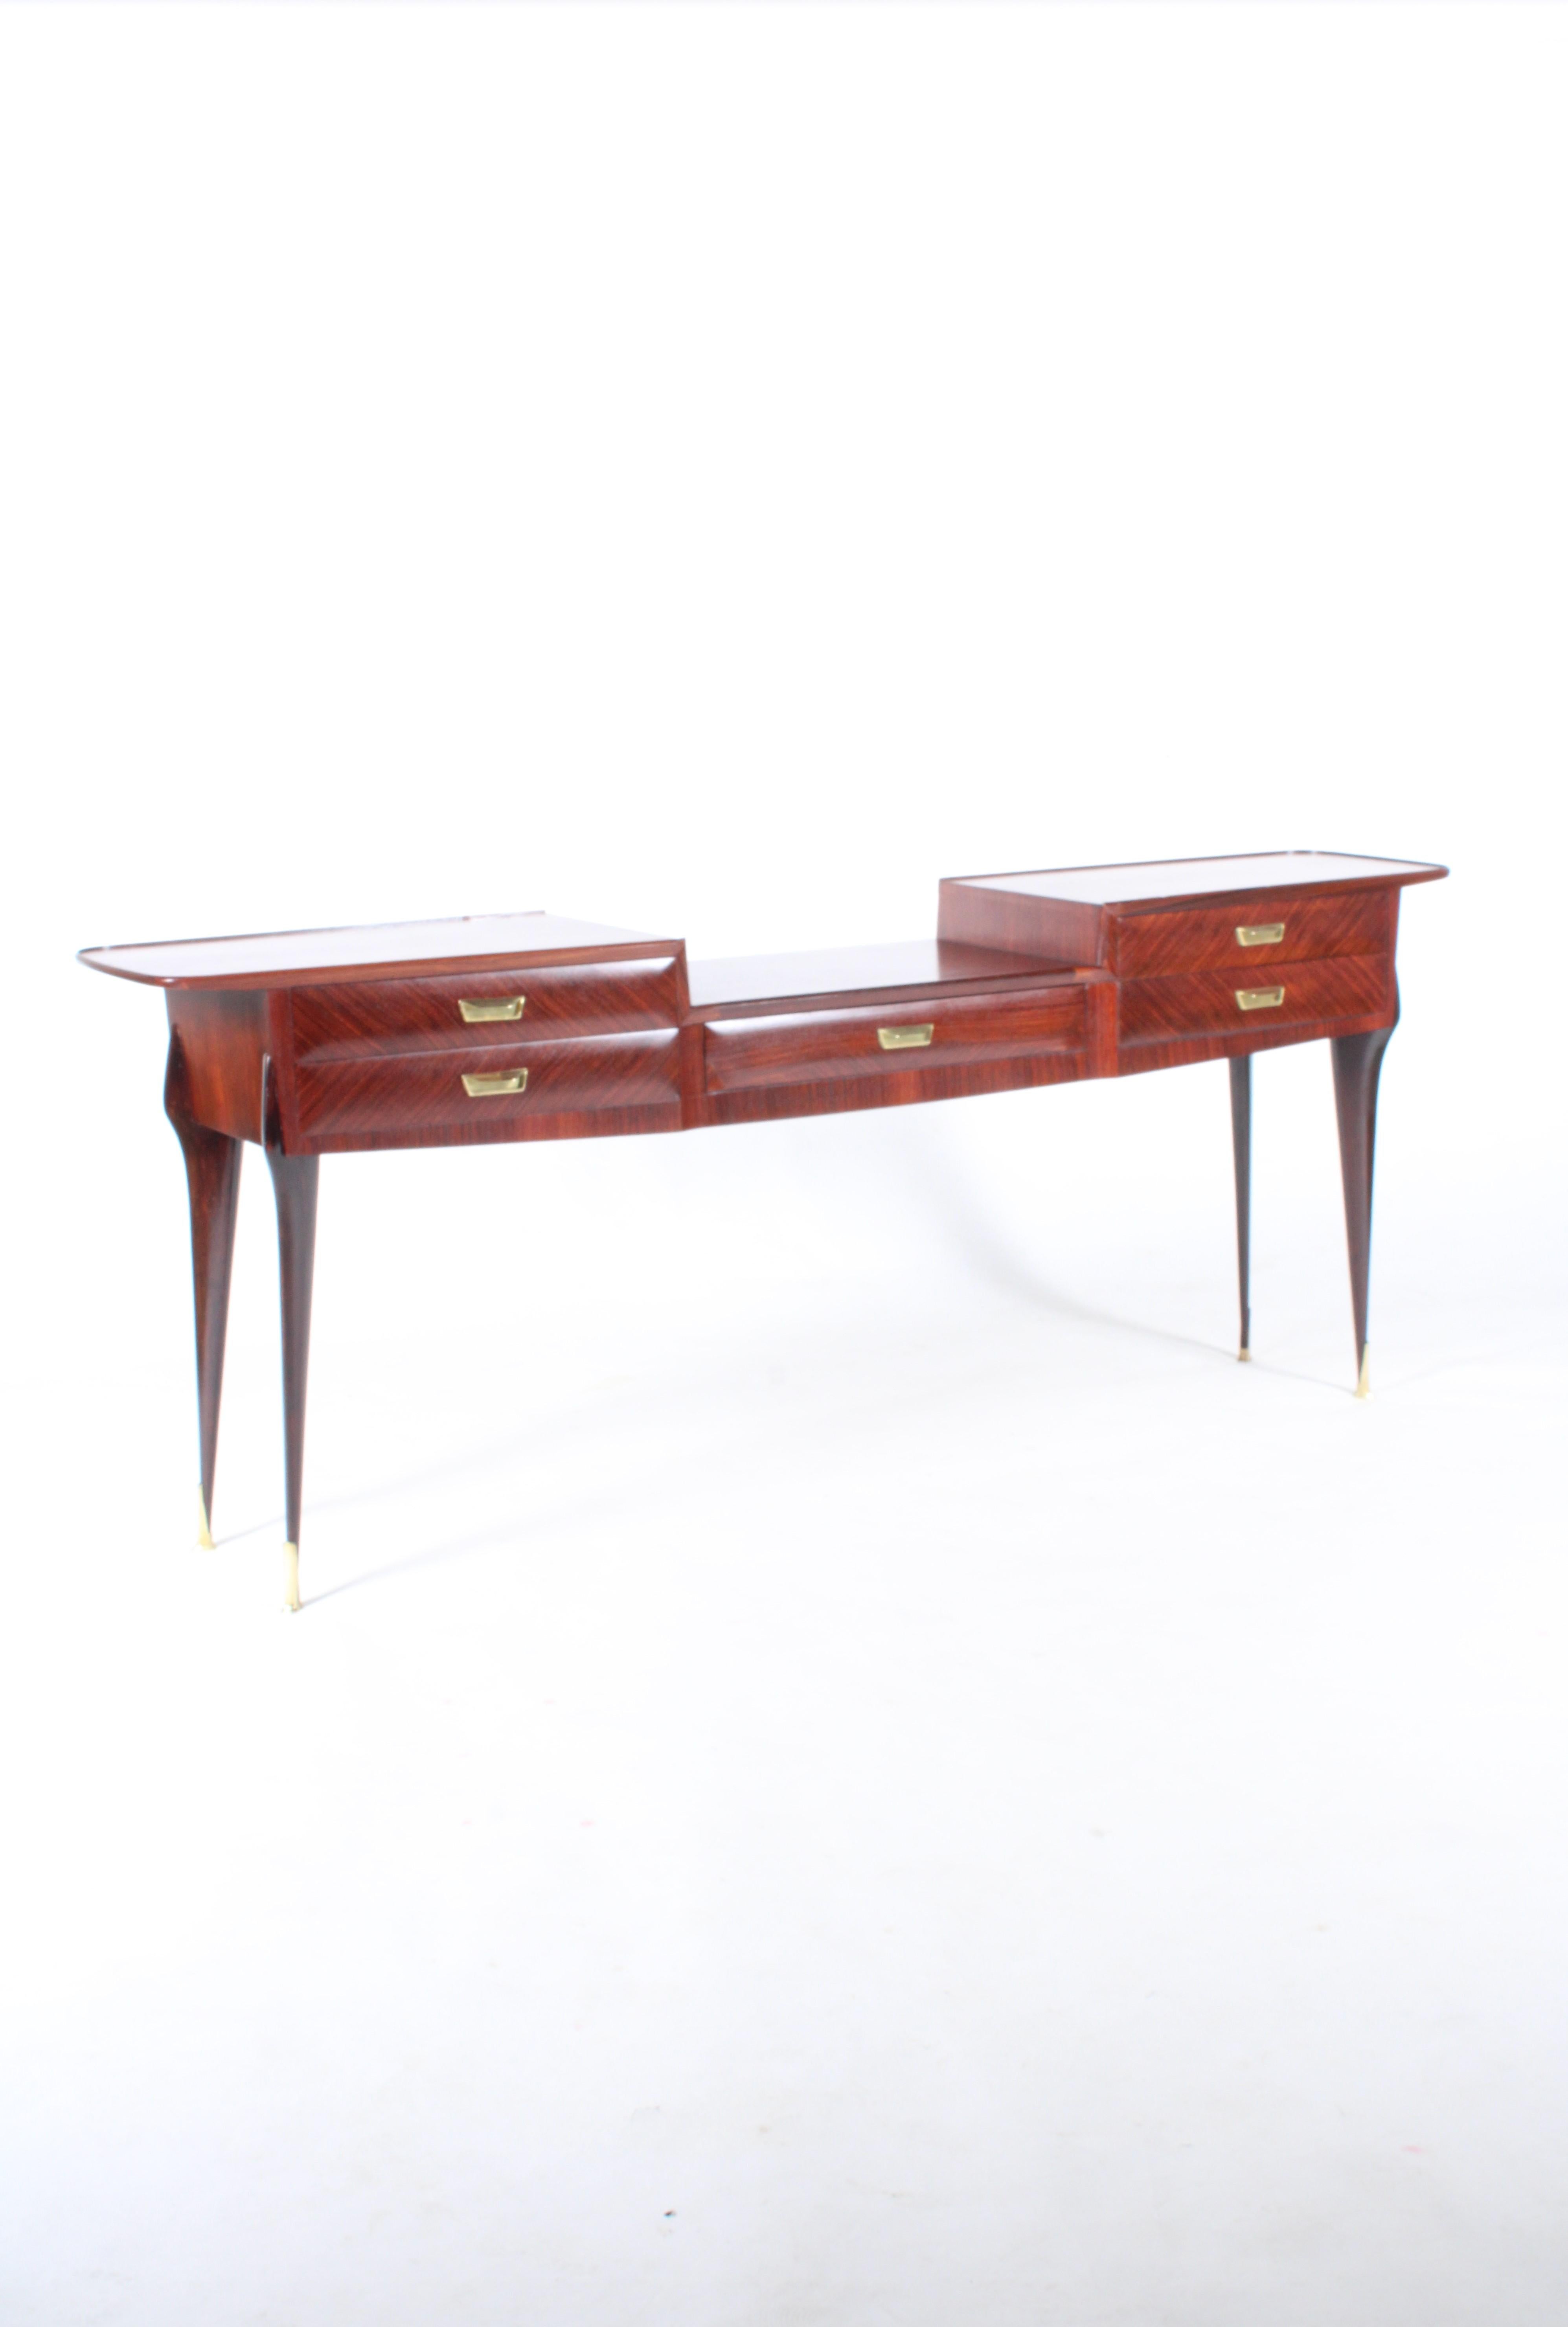 From a private collection in Naples we are delighted to offer for sale this truly exquisite rare original mid century Italian console table attributed to  designer maker Vittorio Dassi. Dating from the 1950’s it oozes mid century Italian style and